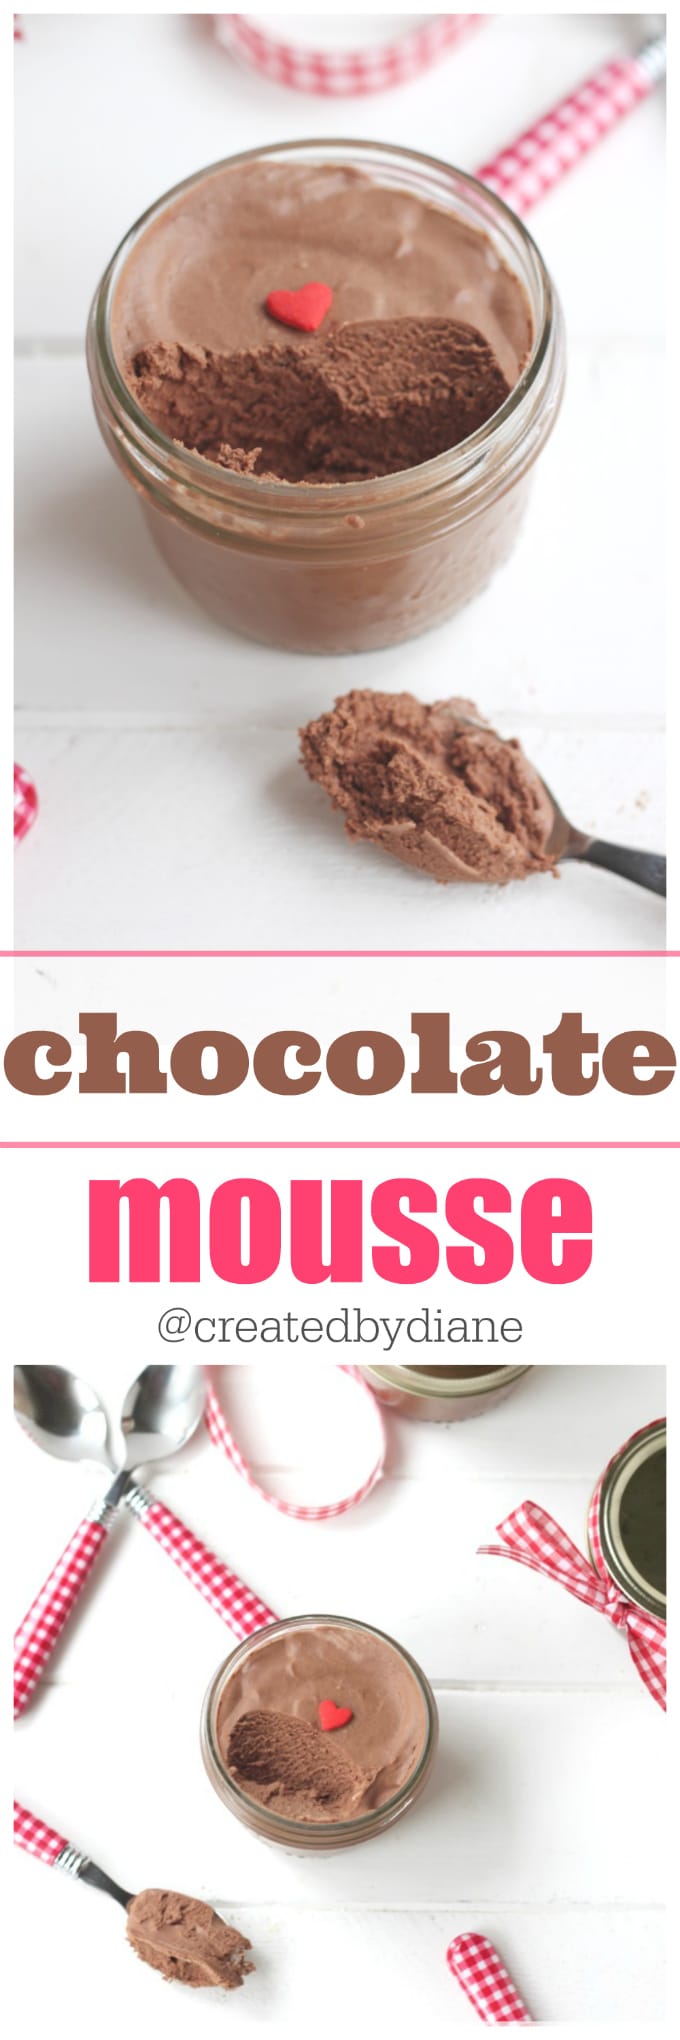 chocolate mousse recipe for great tasting and wonderful texture mousse @createdbydiane